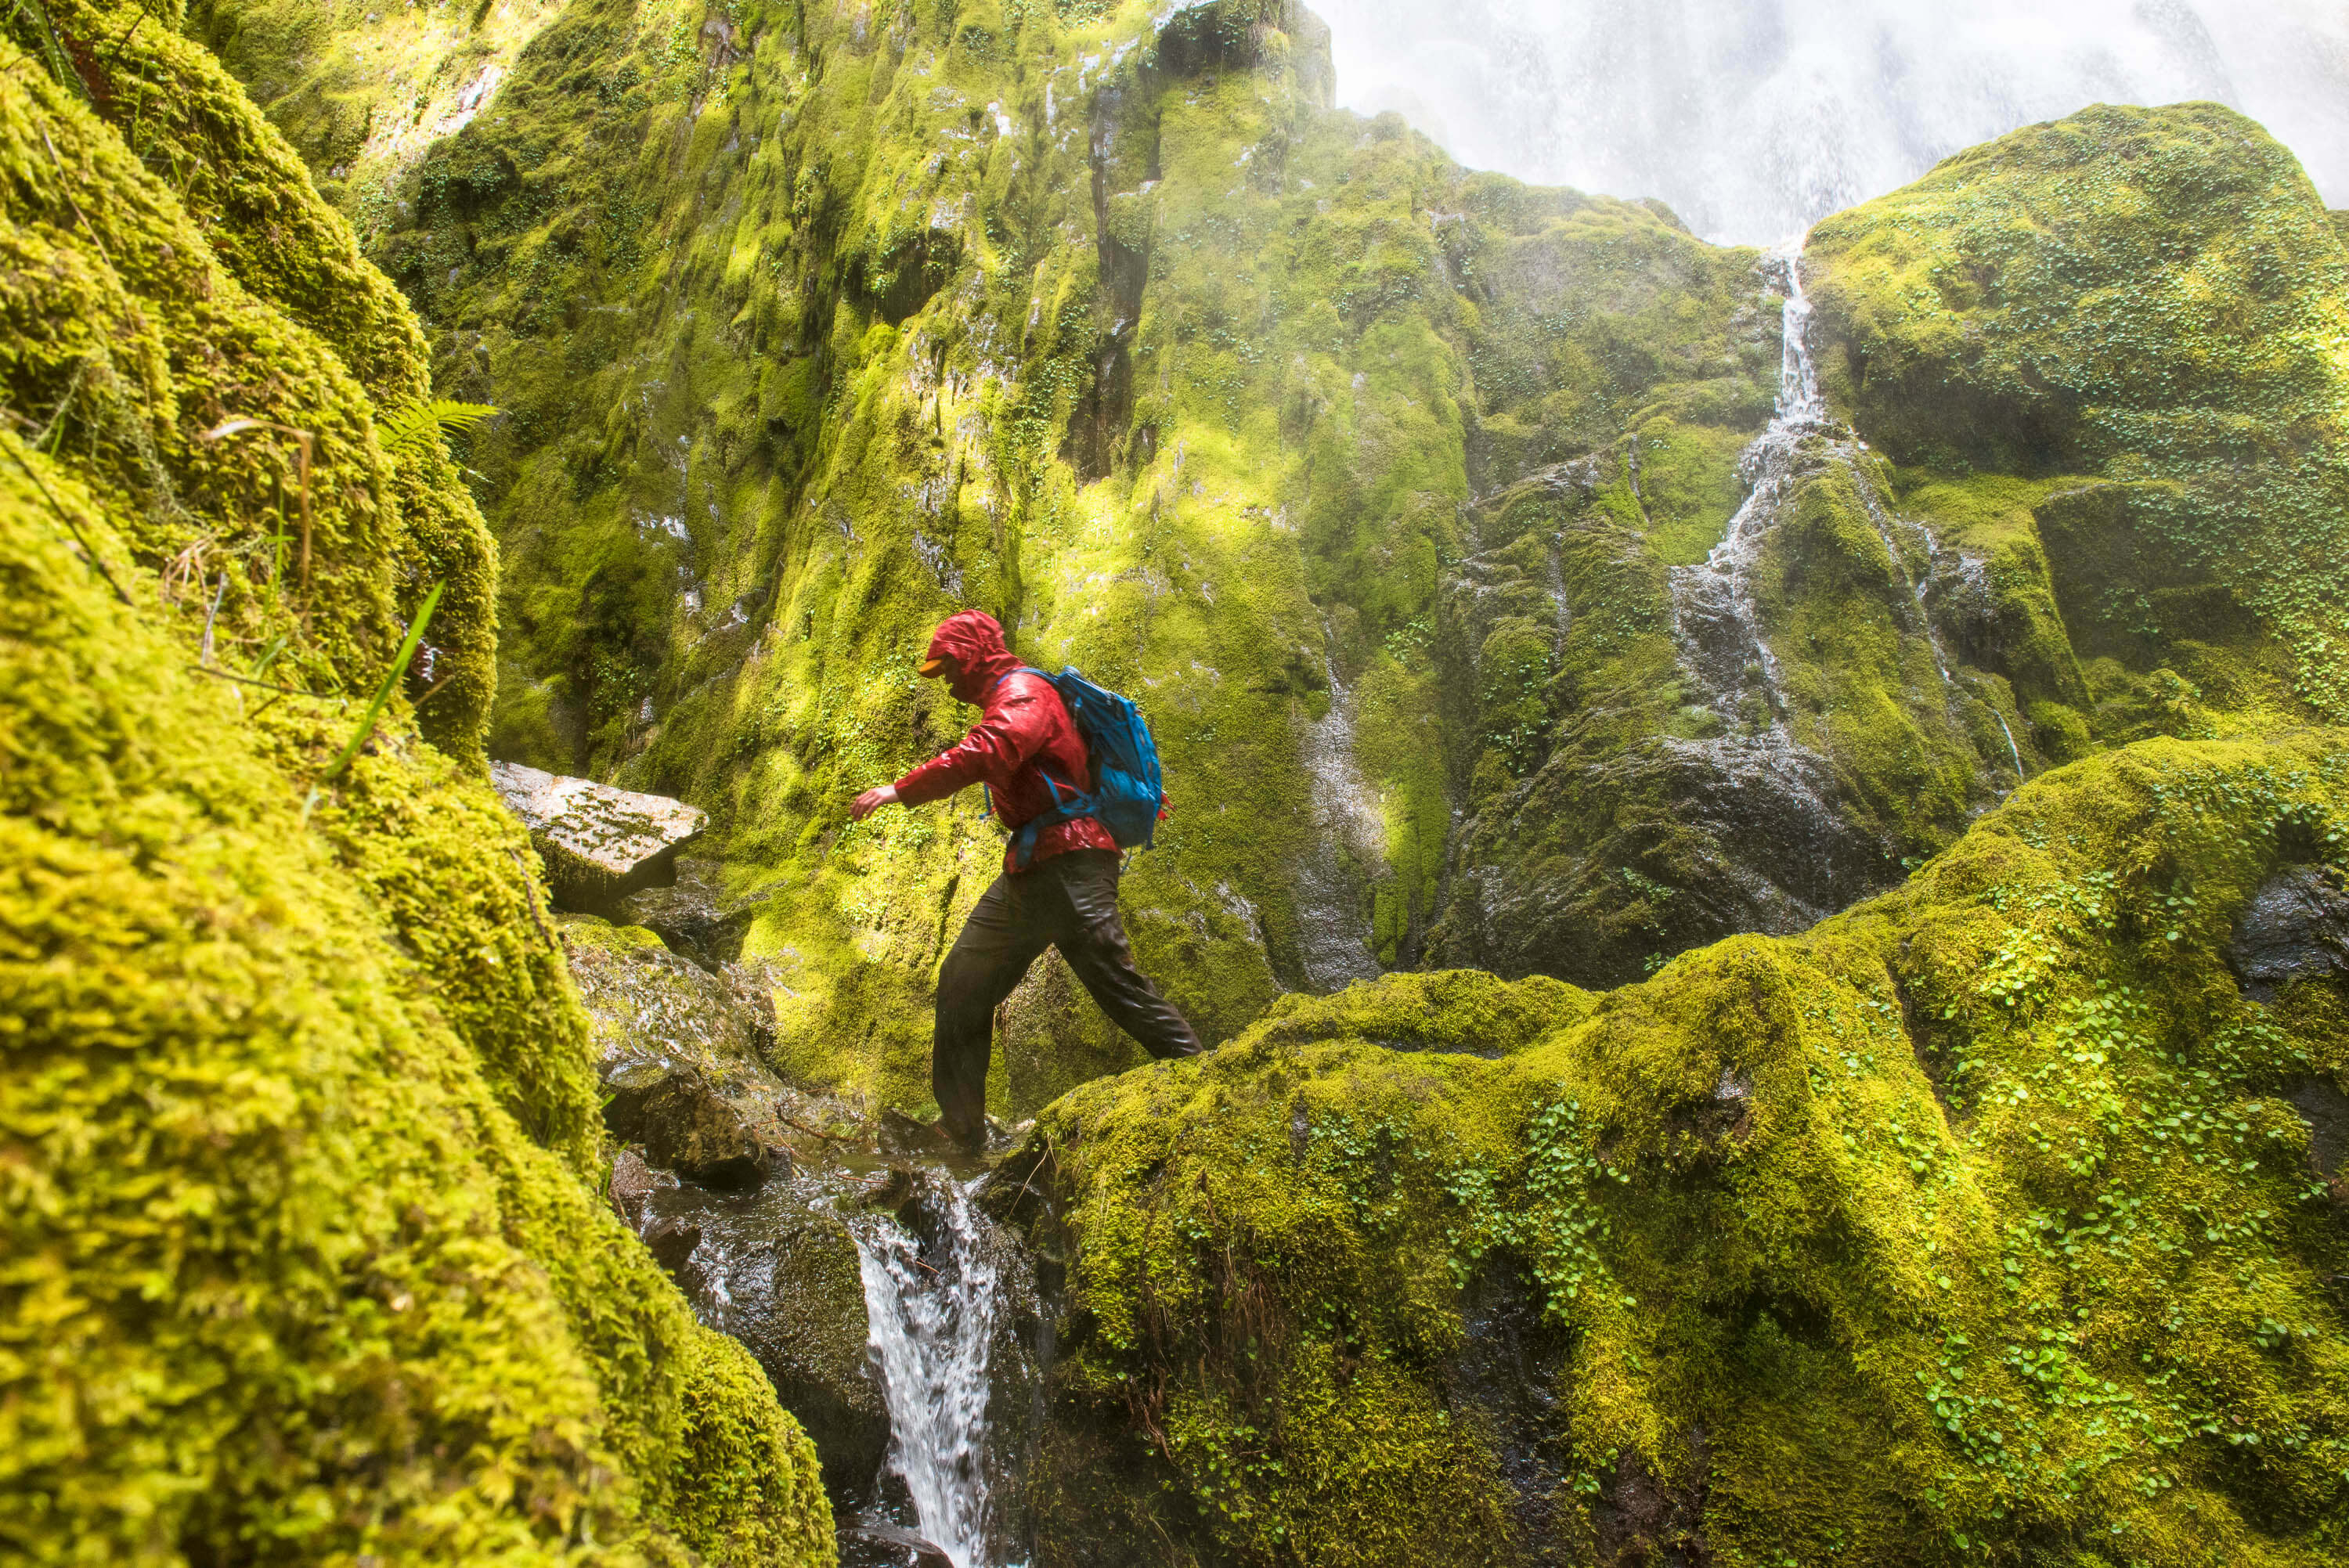 Waterfall spray, moss covered rocks and Lief on a micro adventure